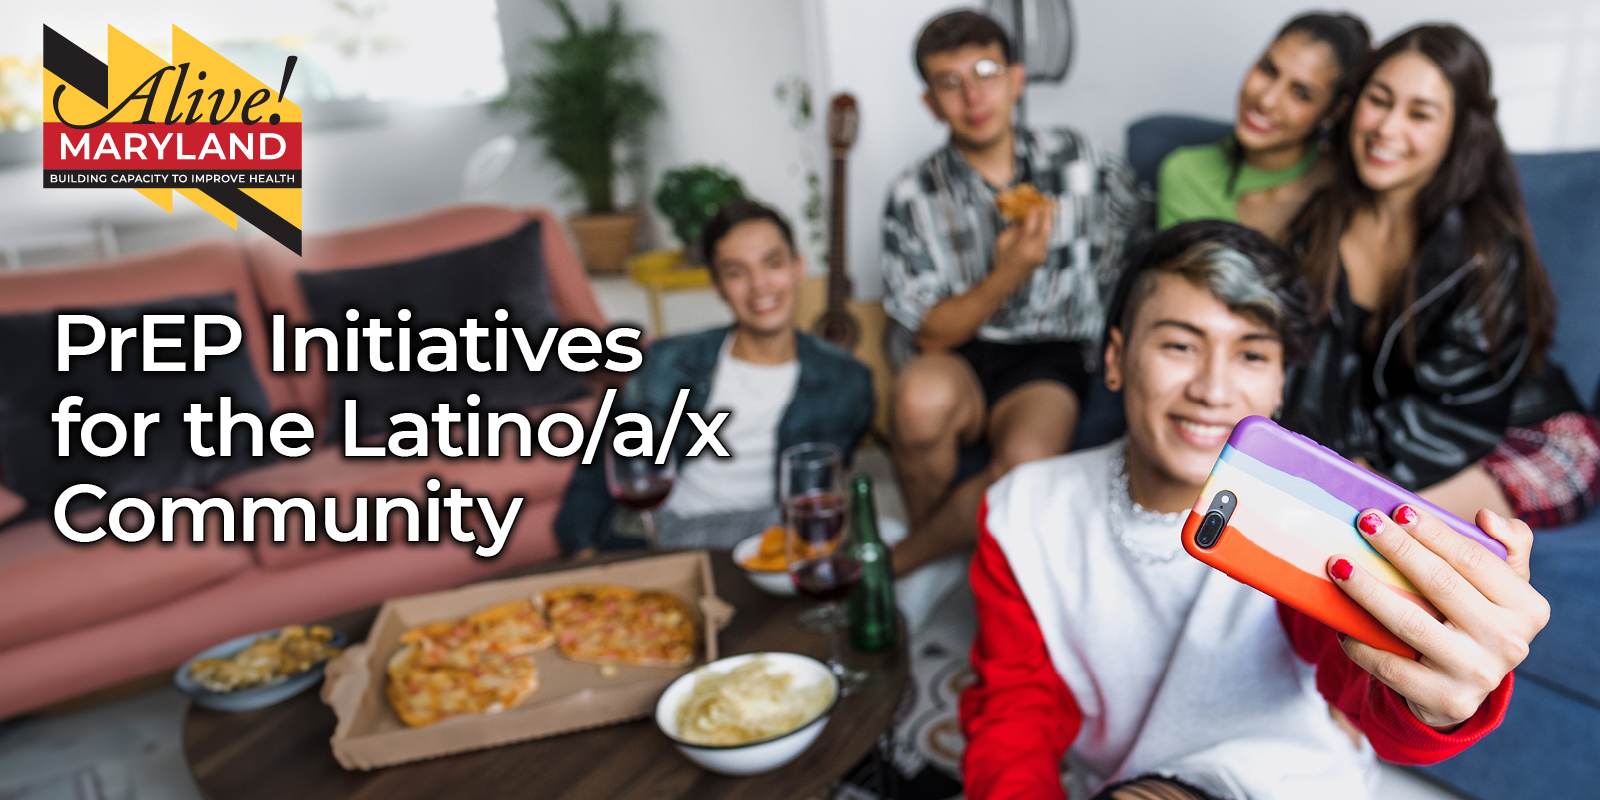 PrEP initiatives for the Latino/x/a Community